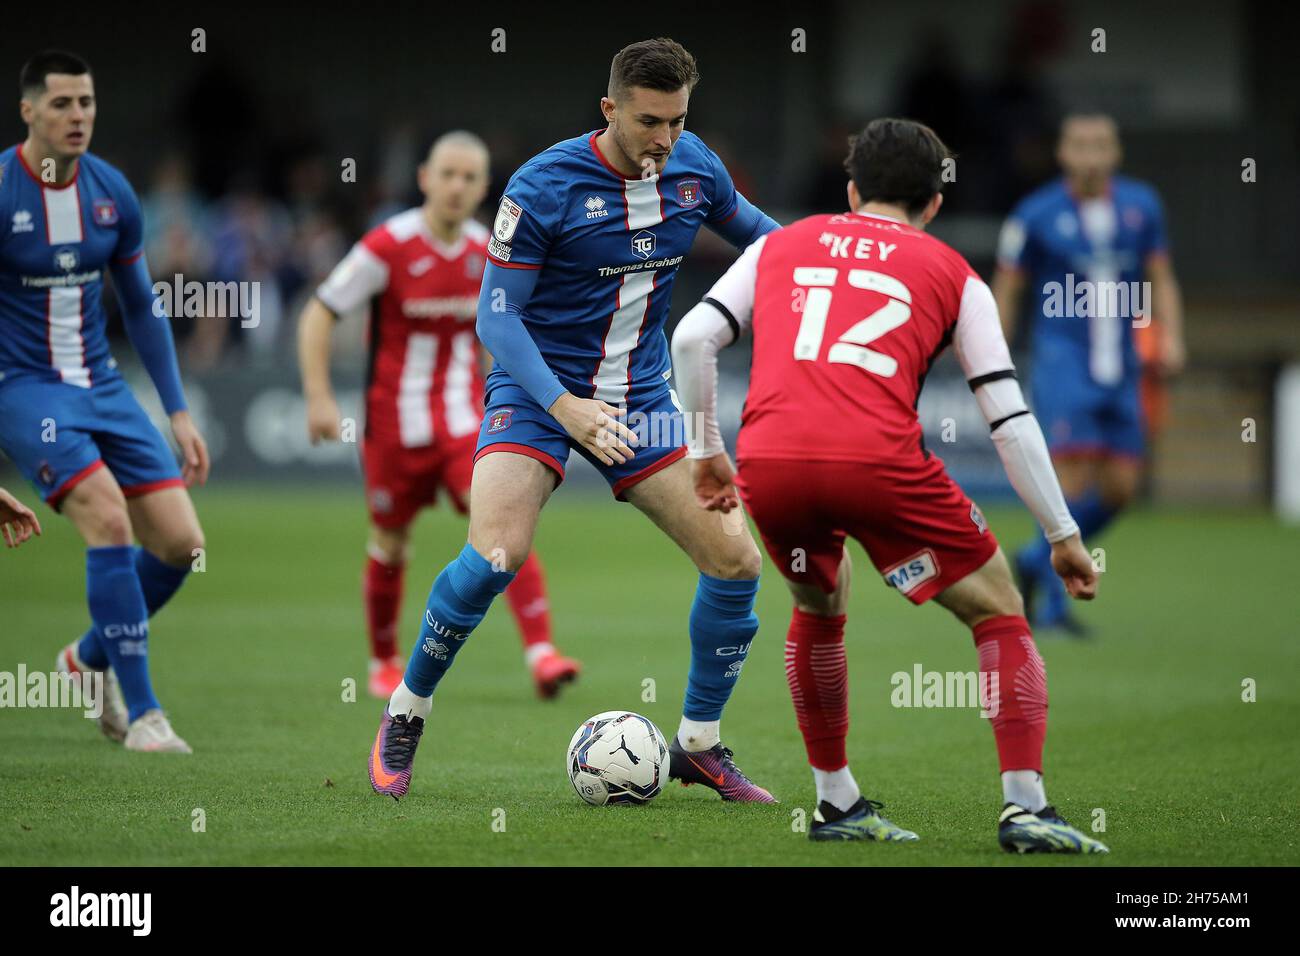 Exeter, UK. 20th Nov, 2021. Brennan Dickenson of Carlisle United during the Sky Bet League 2 match between Exeter City and Carlisle United at St James' Park, Exeter, England on 20 November 2021. Photo by Dave Peters/PRiME Media Images. Credit: PRiME Media Images/Alamy Live News Stock Photo